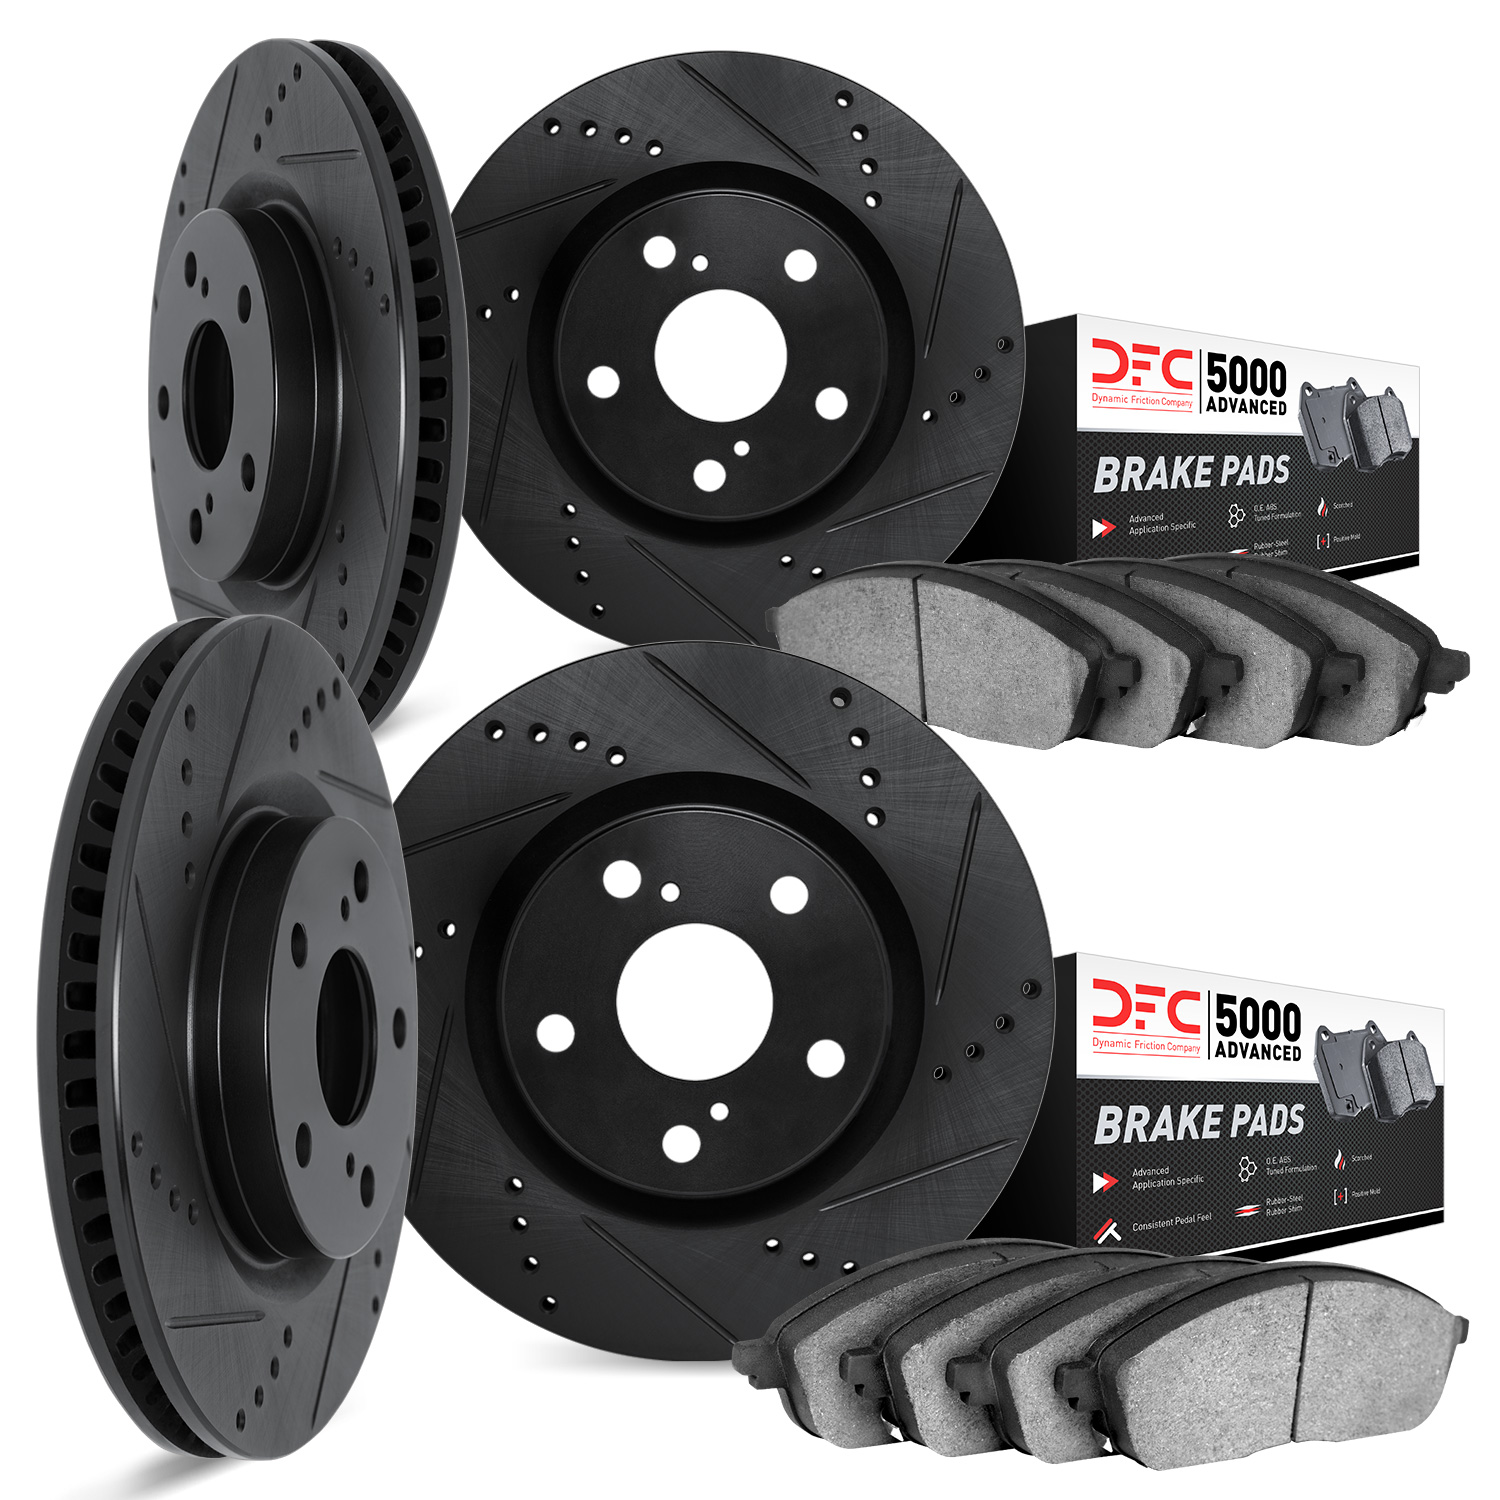 8504-68004 Drilled/Slotted Brake Rotors w/5000 Advanced Brake Pads Kit [Black], 1997-2001 Infiniti/Nissan, Position: Front and R